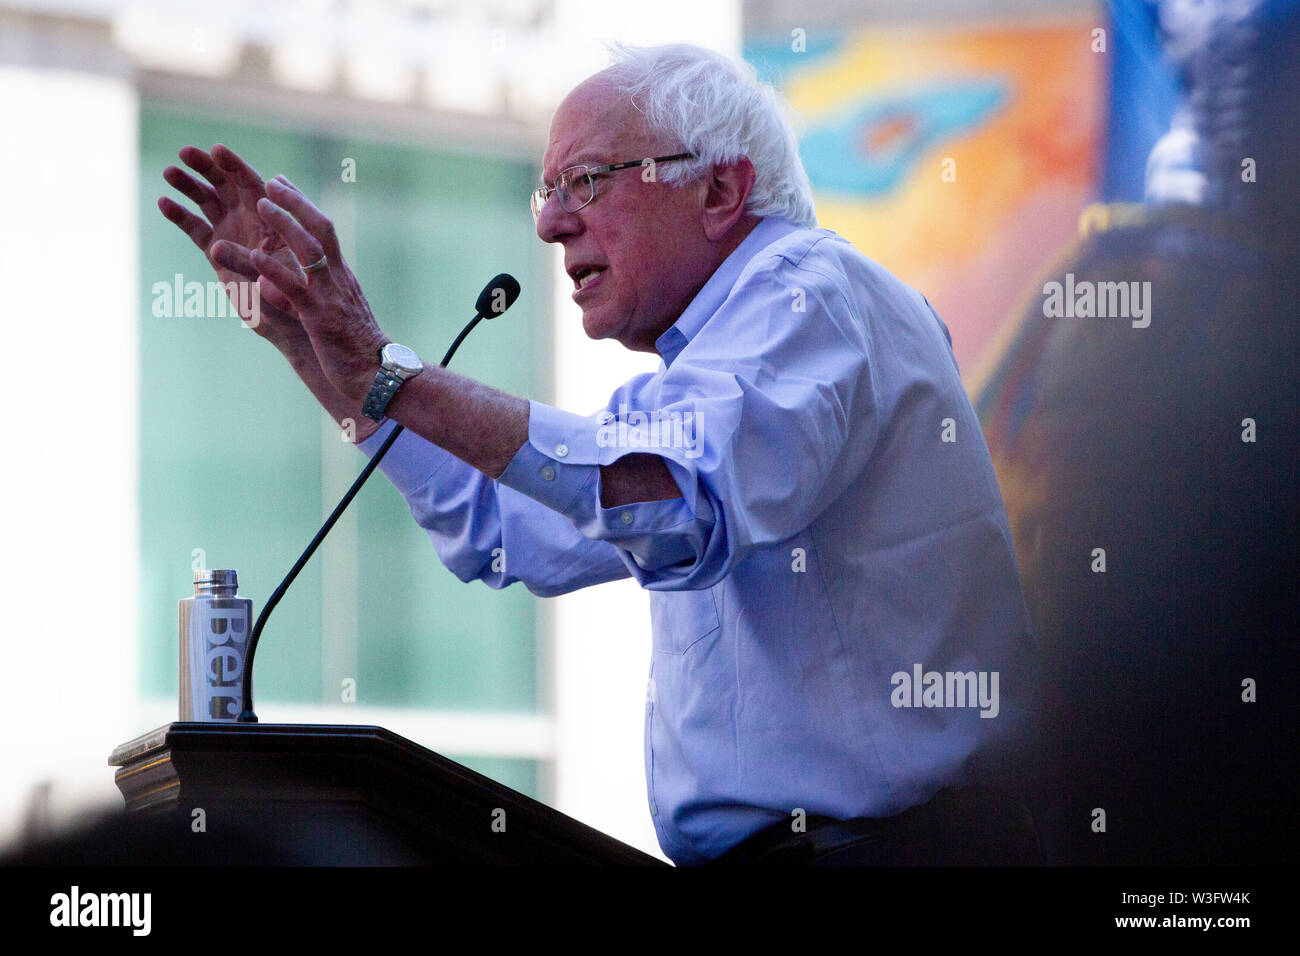 Philadelphia, Pennsylvania, USA. 15th July, 2019. Senator Bernie Sanders addresses the crowd at a rally gathered to protest the closure of Hahnemann University Hospital in Philadelphia, PA, July 15, 2019. Hahnemann, a busy urban healthcare center, is facing imminent closure after being acquired by a hedge fund that is looking to raze the building and turn the land into rental or retail properties. 15th July, 2019. Credit: Michael Candelori/ZUMA Wire/Alamy Live News Credit: ZUMA Press, Inc./Alamy Live News Stock Photo